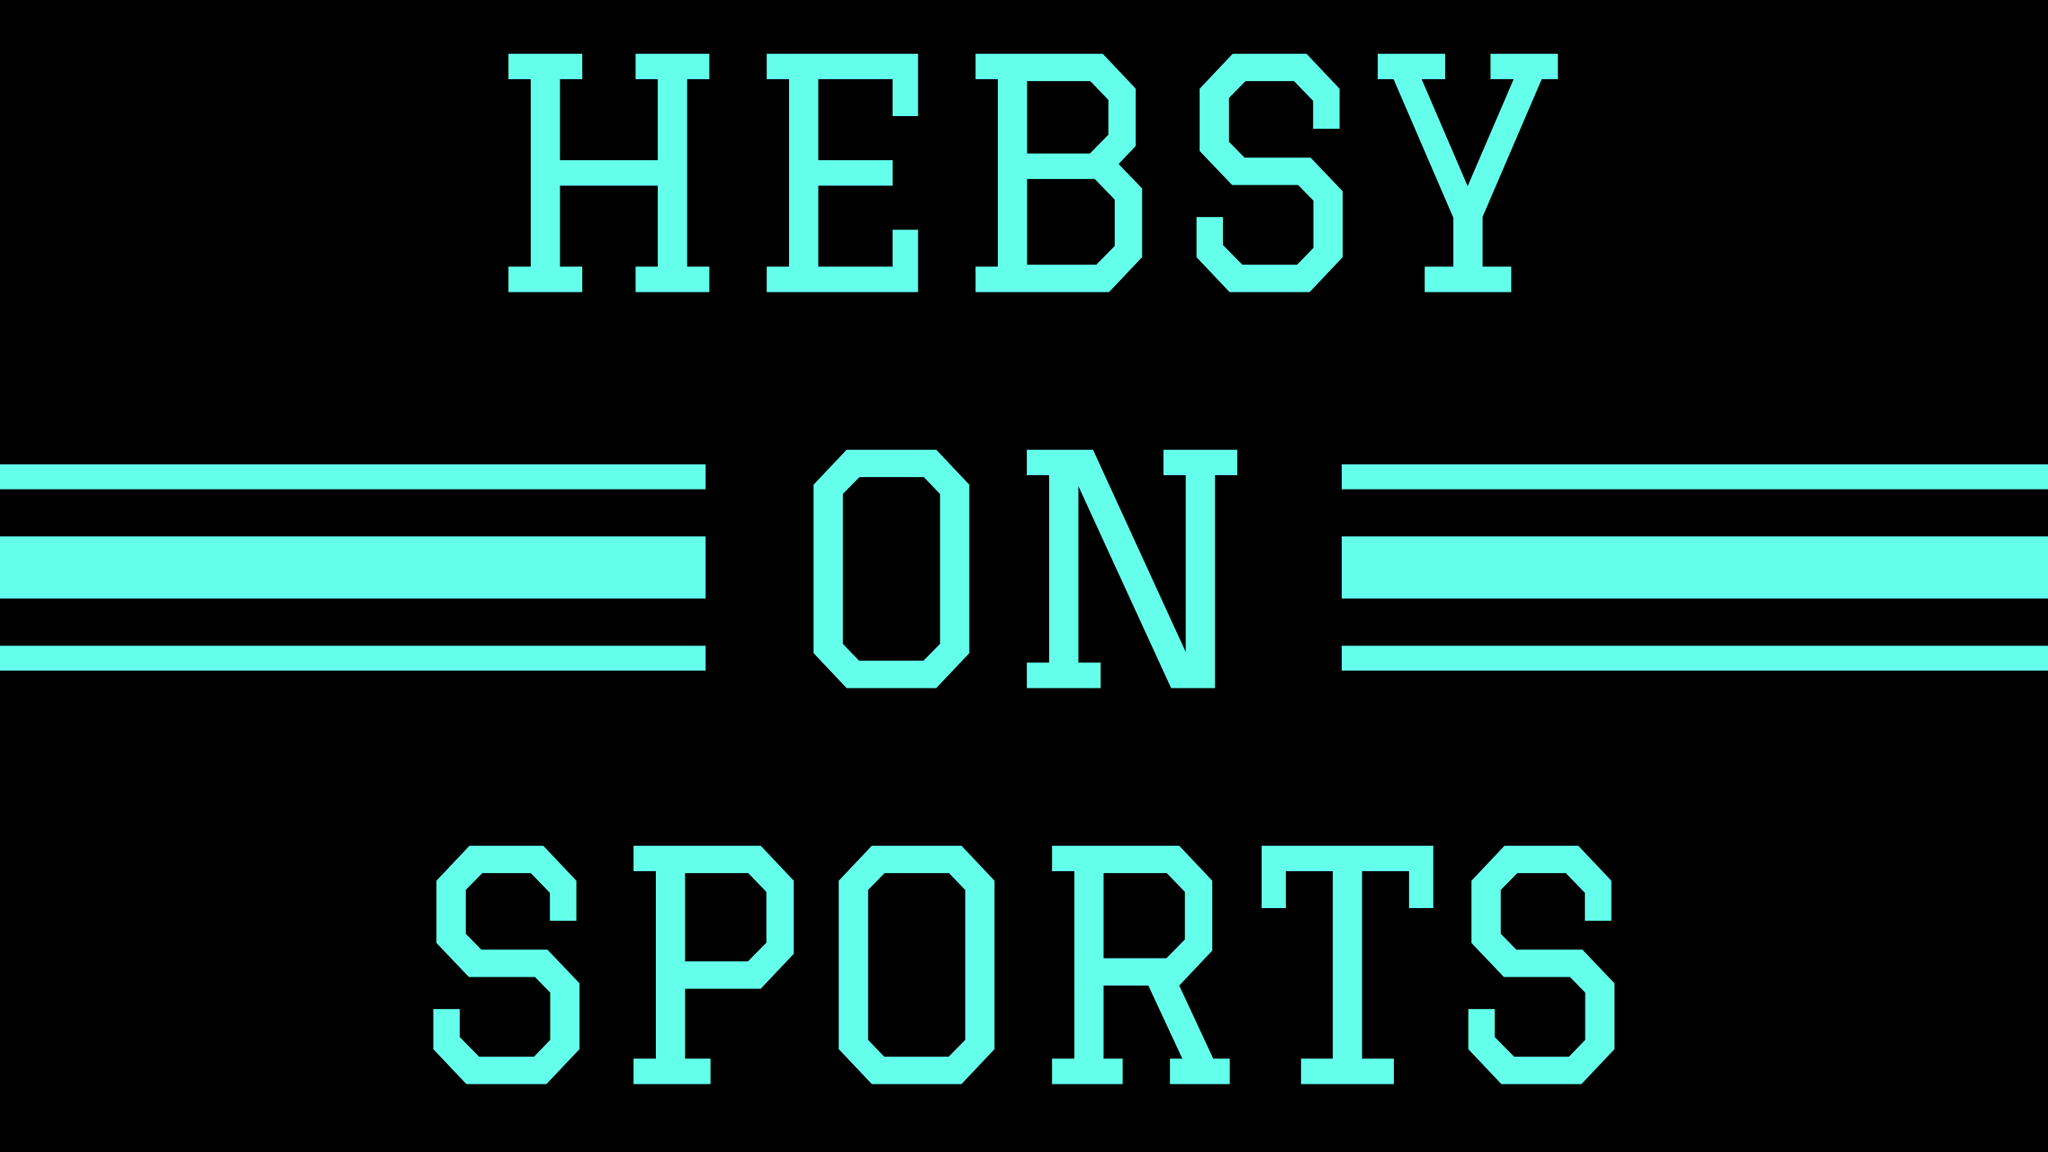 Hebsy on Sports for December 17, 2021 with Special Guest Humble Howard Glassman from Humble and Fred